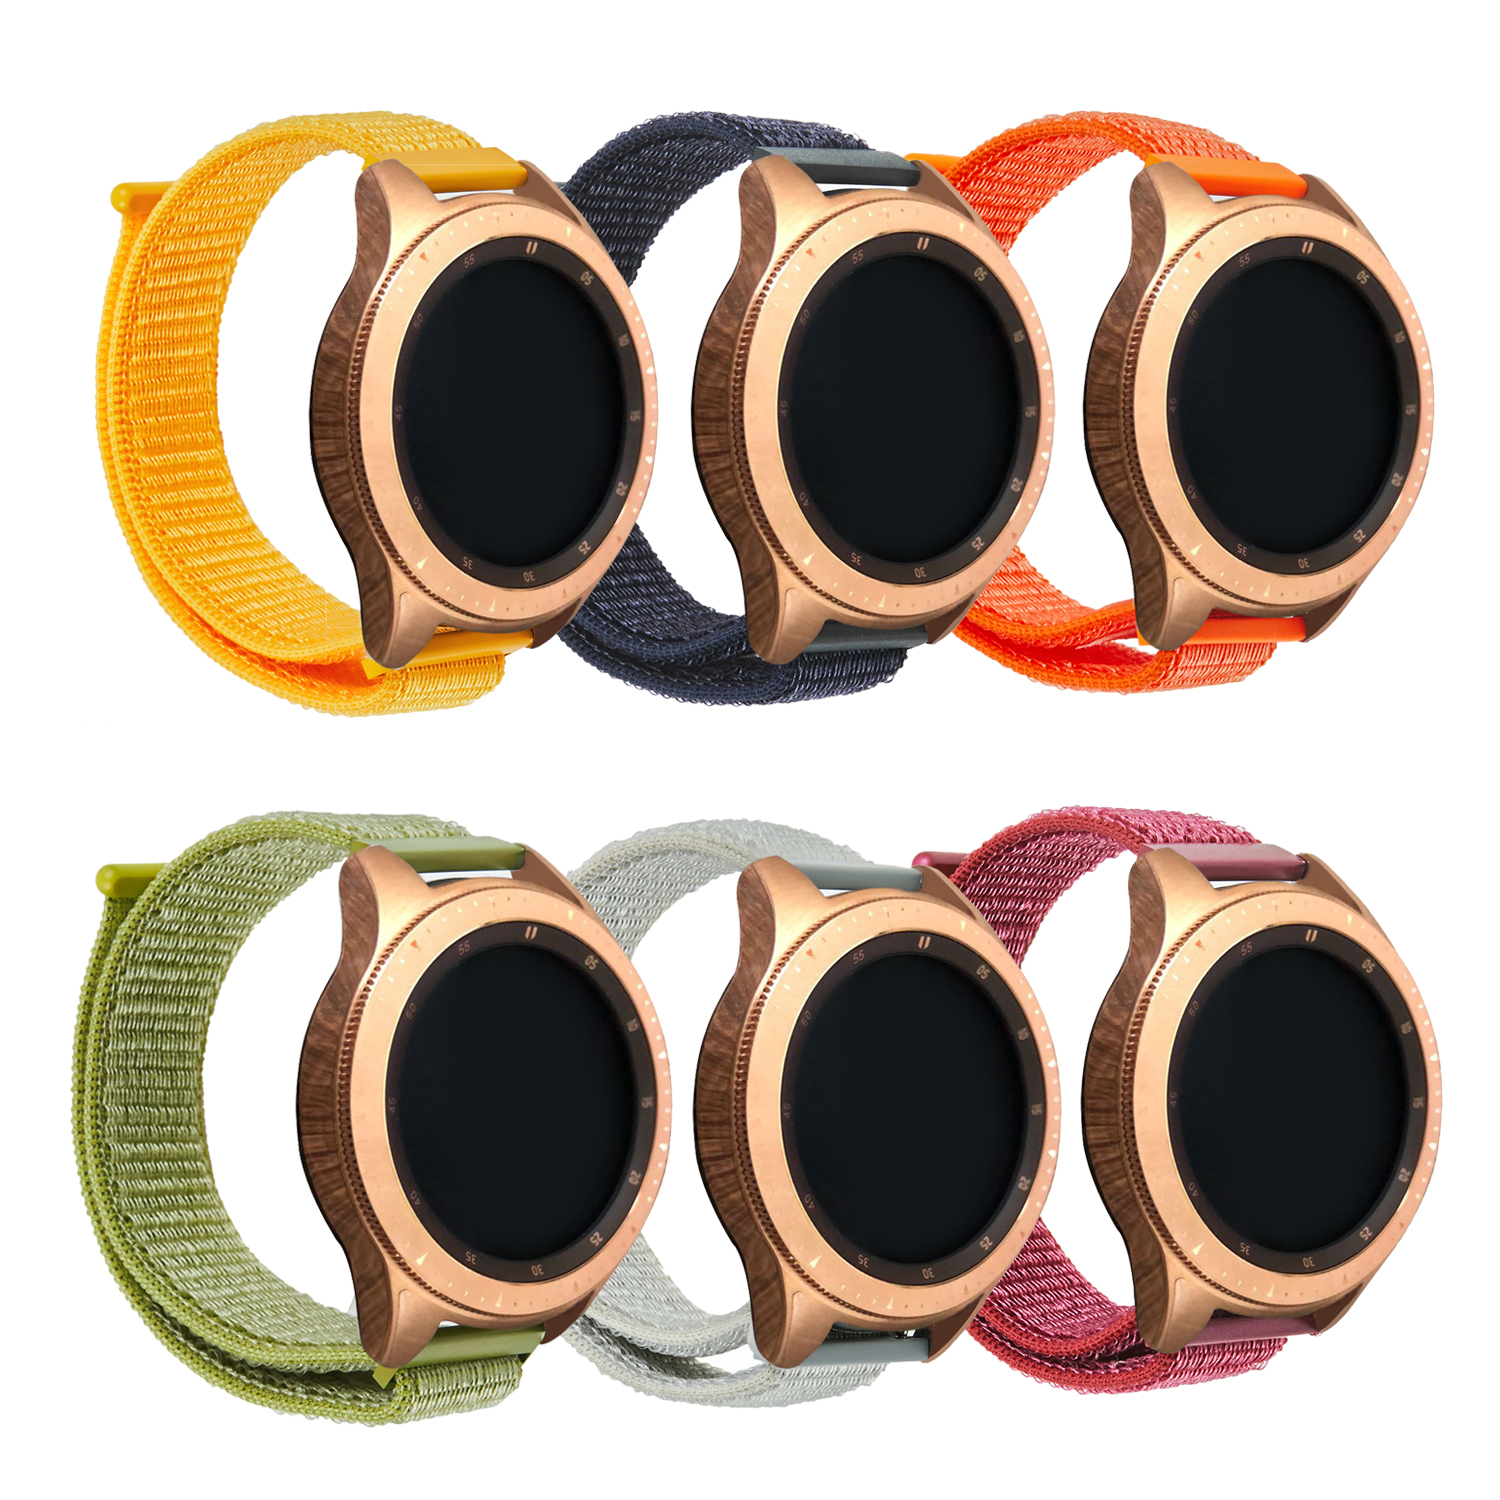 20mm-Nylon-Watch-Strap-Watch-Band-Replacement-For-Samsung-Galaxy-Watch-Active-2019-1457213